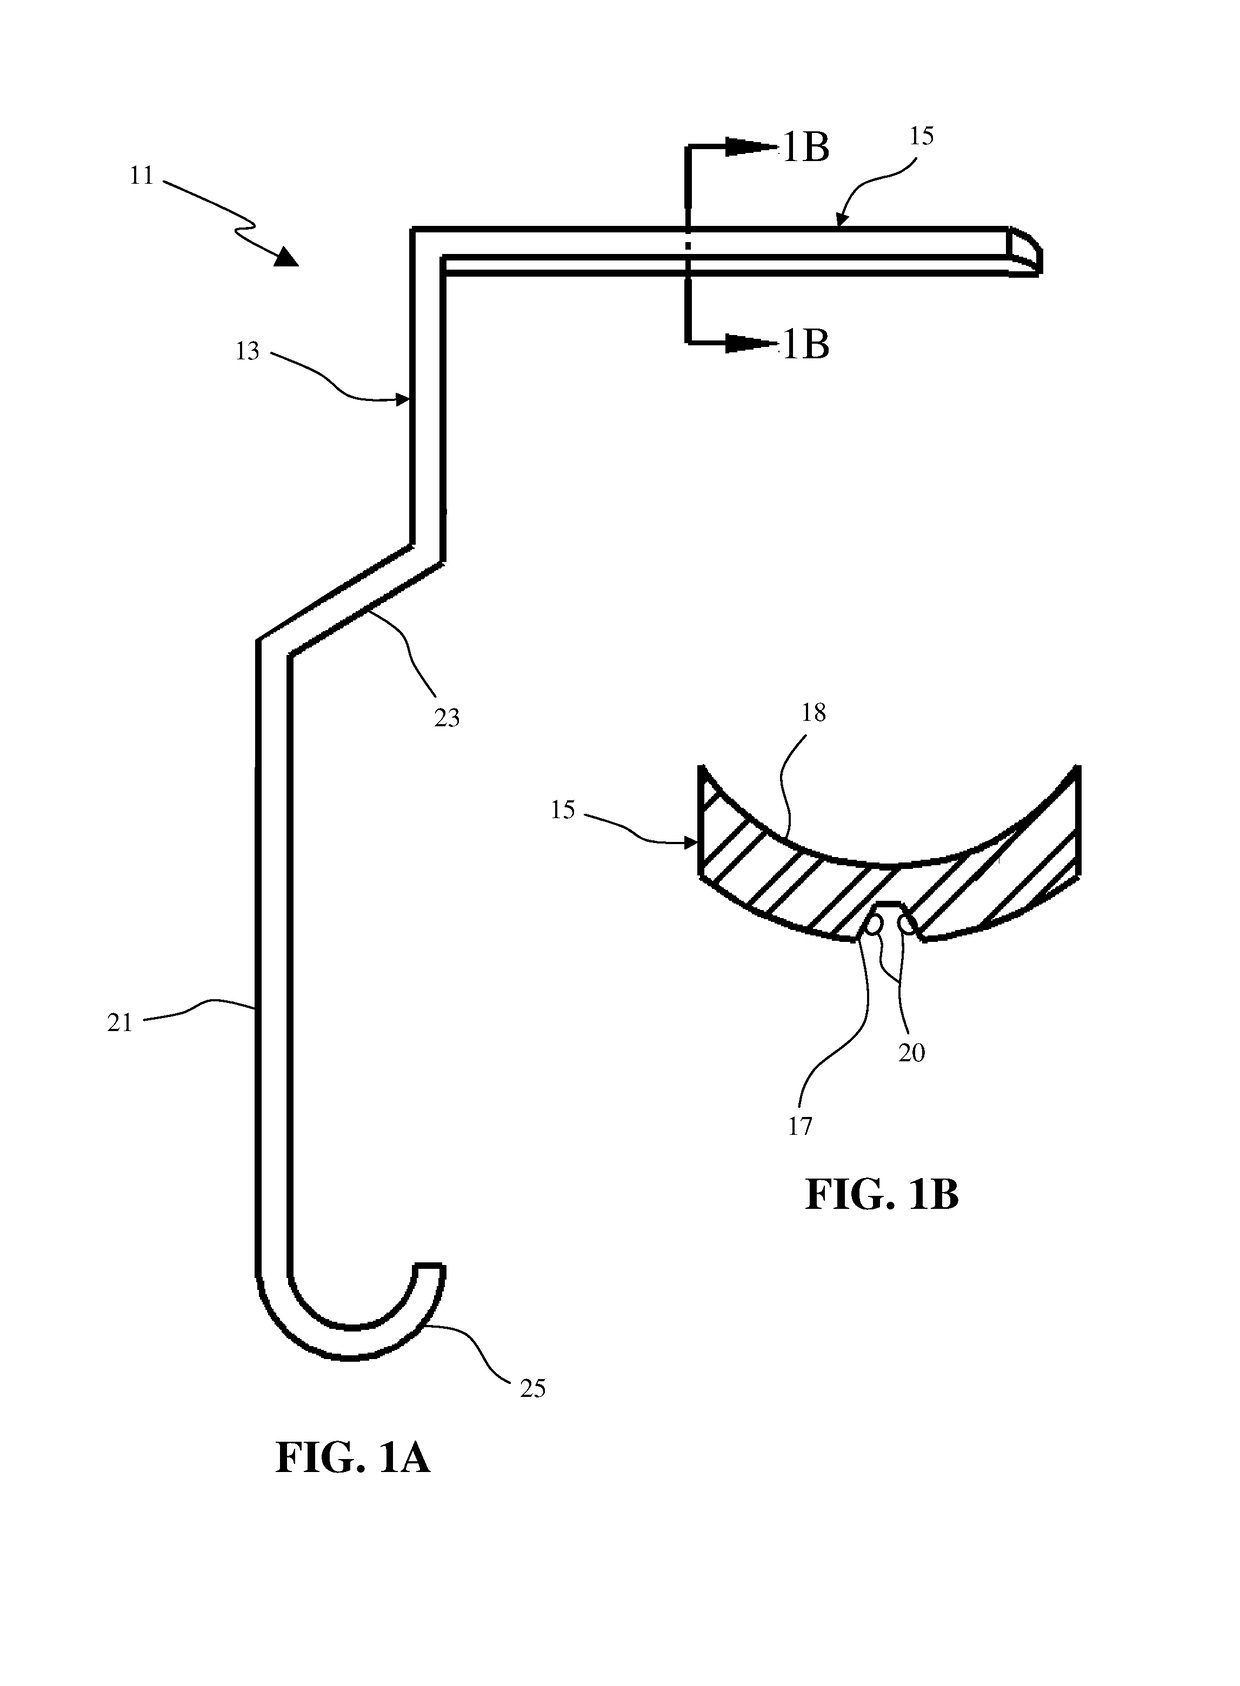 Device and method for safely expanding minimally invasive surgical incisions